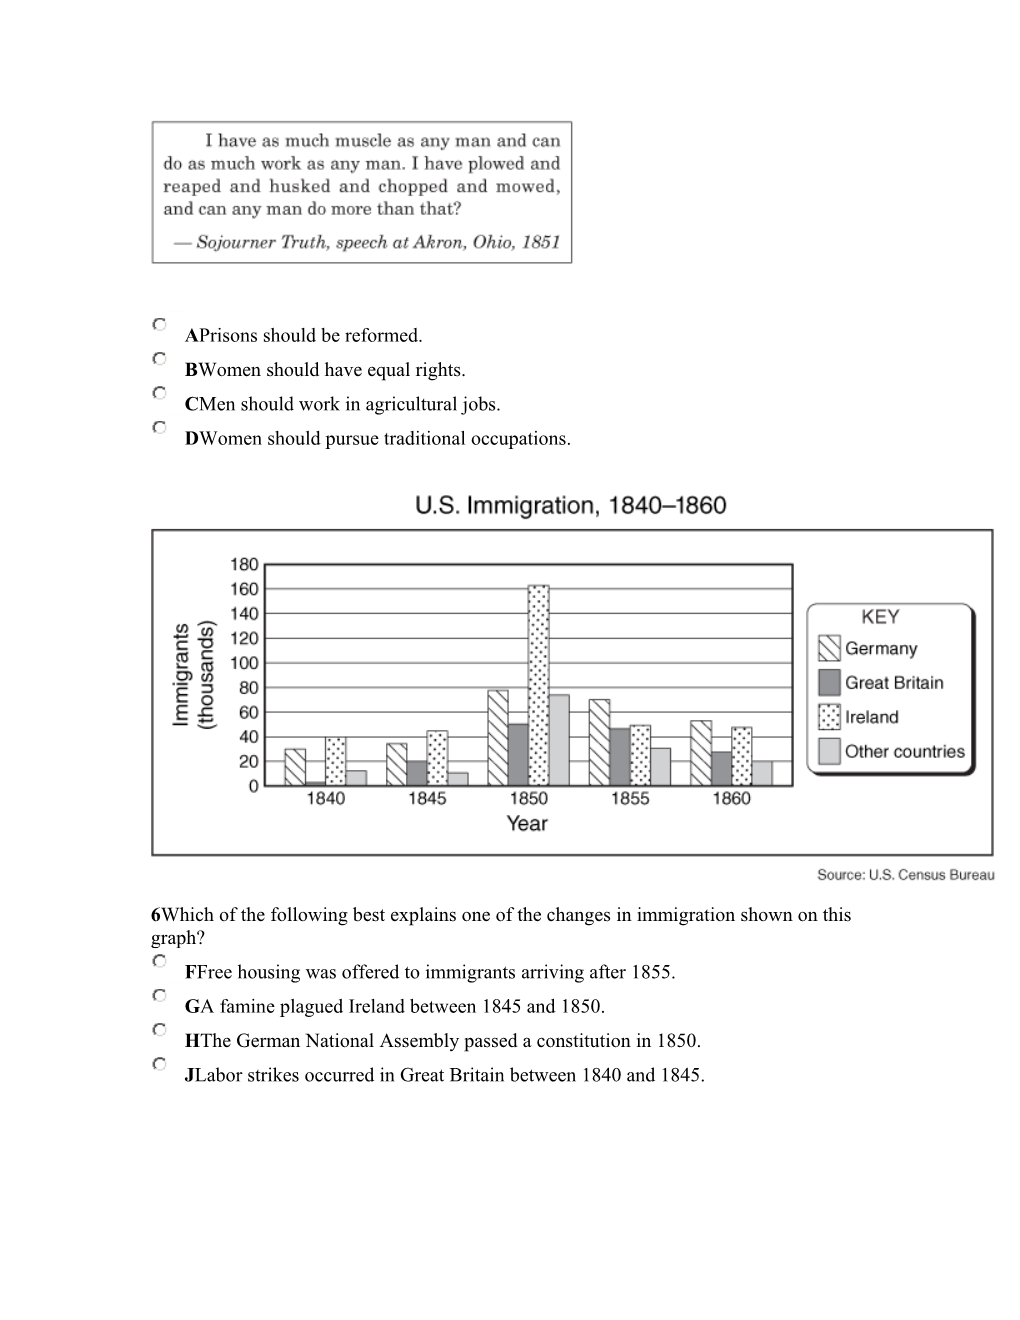 6Which of the Following Best Explains One of the Changes in Immigration Shown on This Graph?